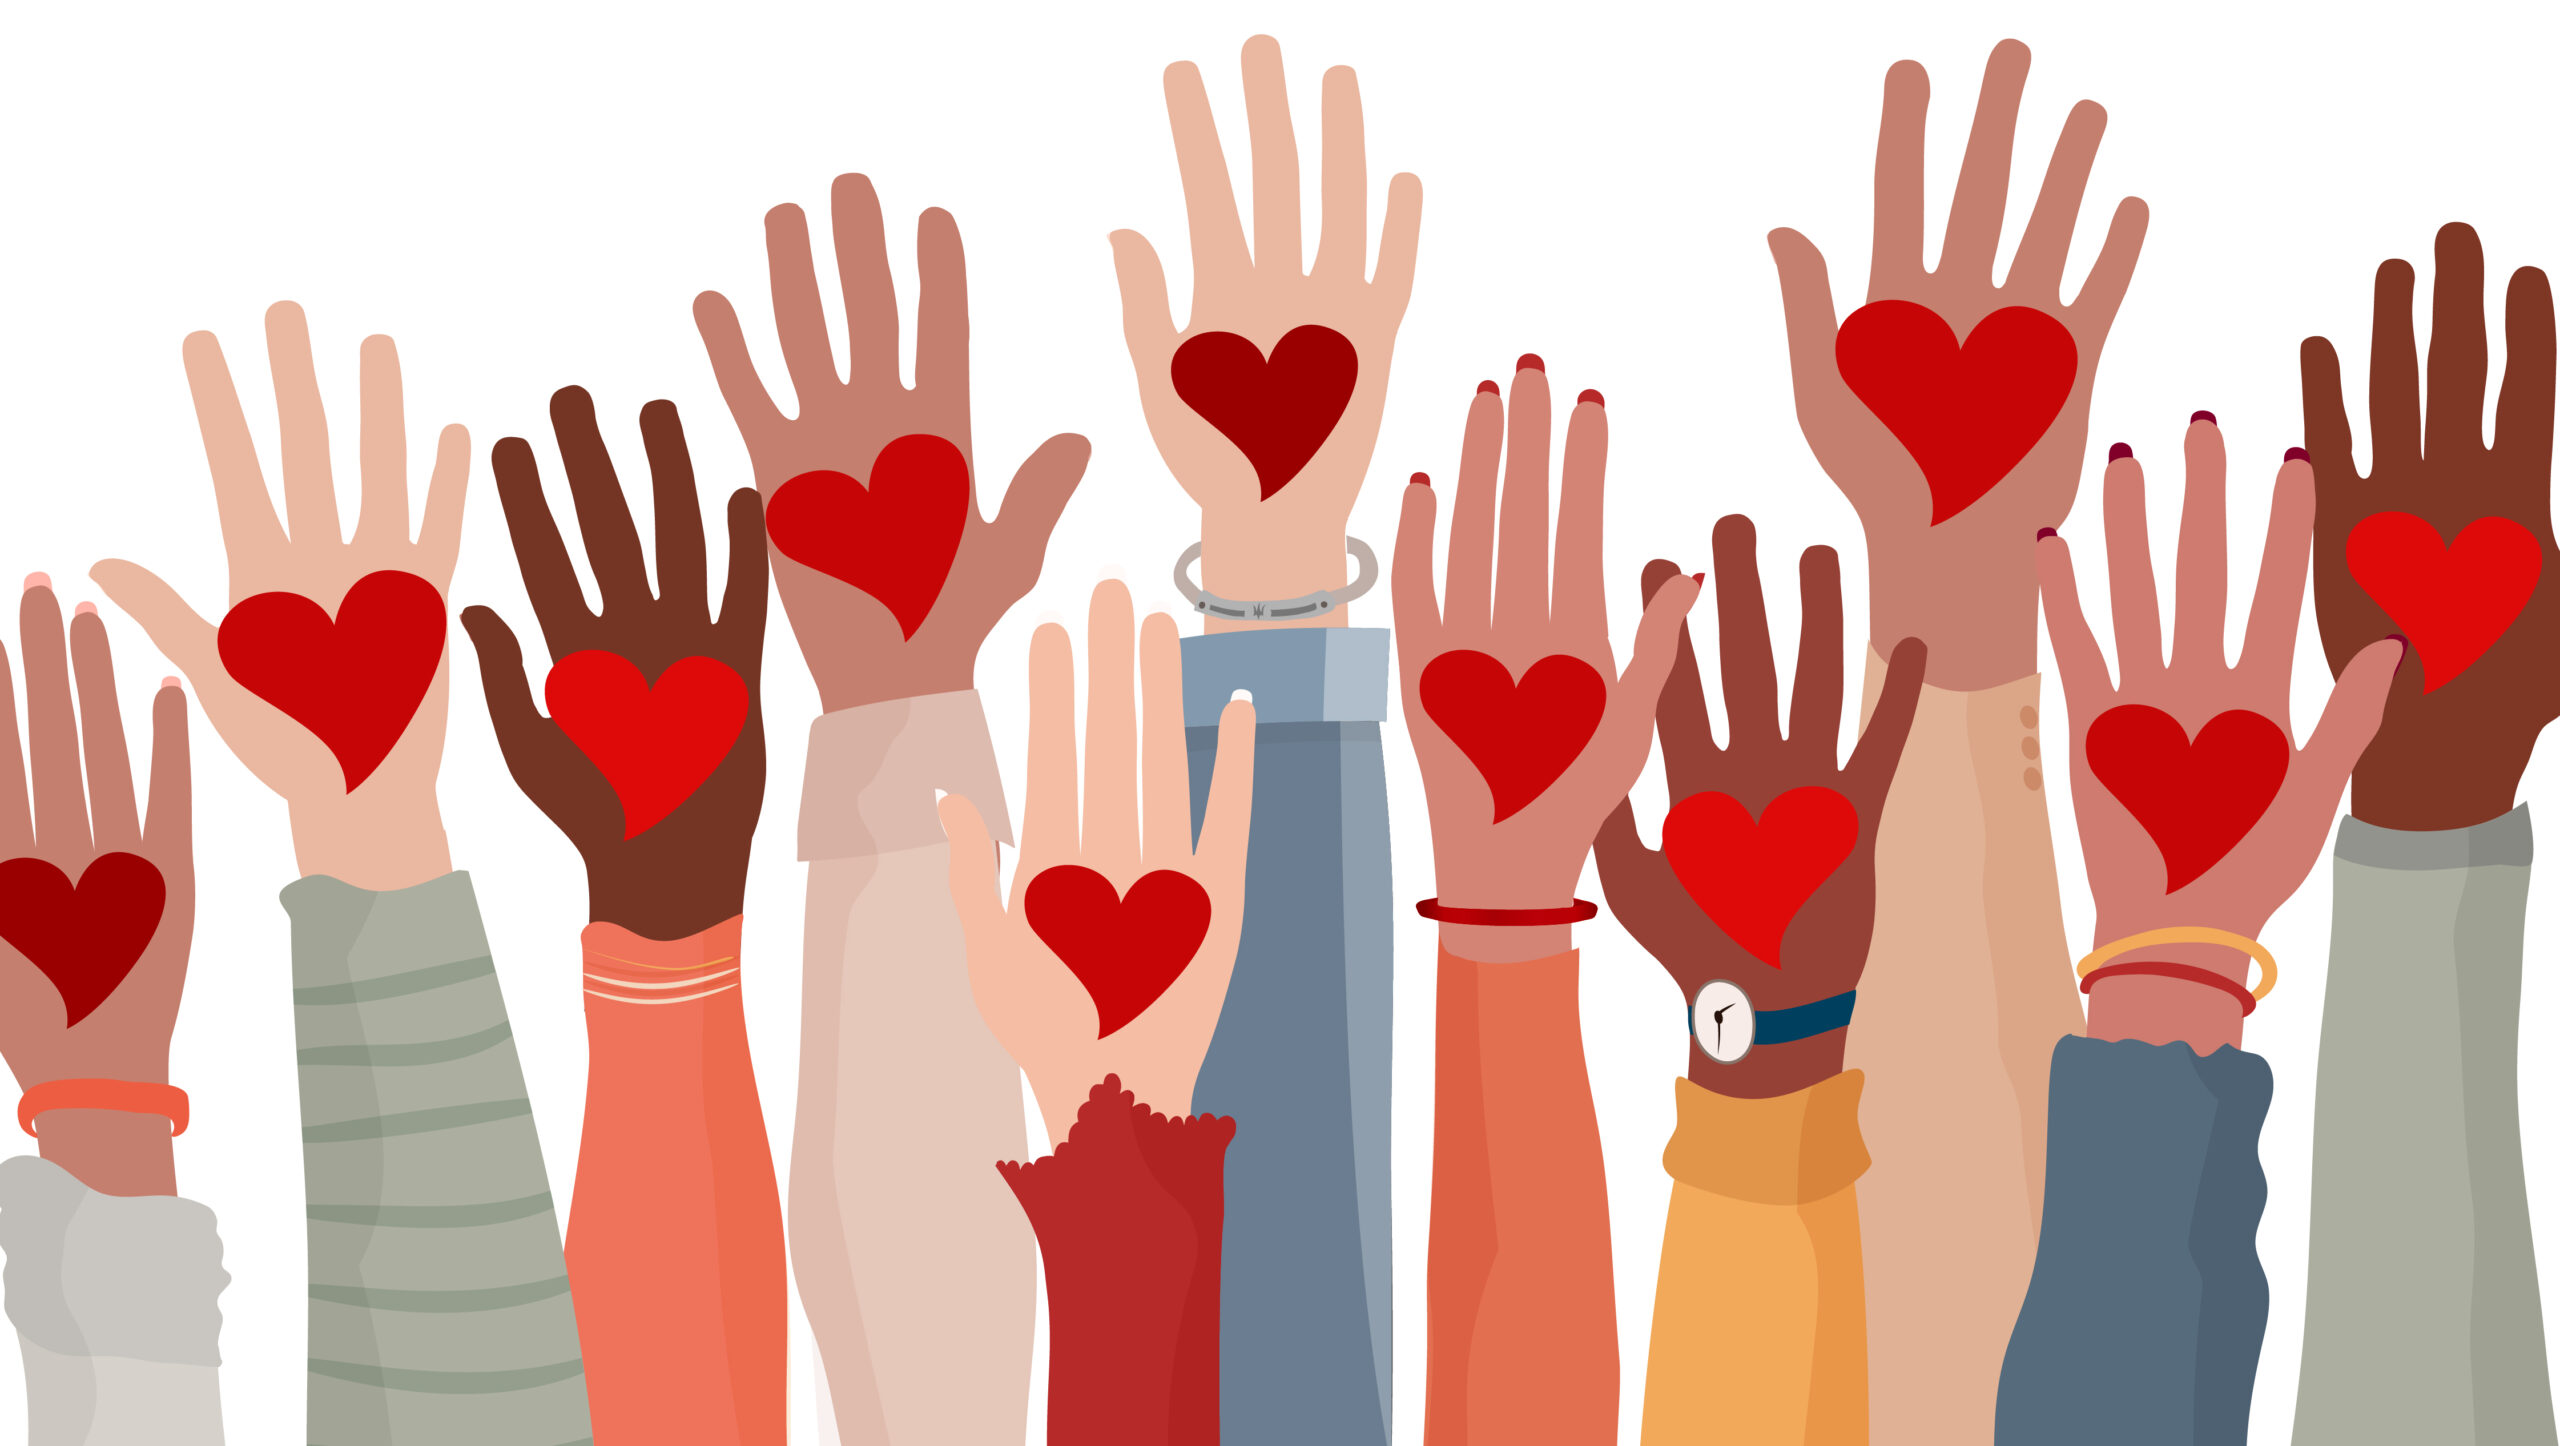 Raised hands illustrations with hearts on them. All donor contributions matter!